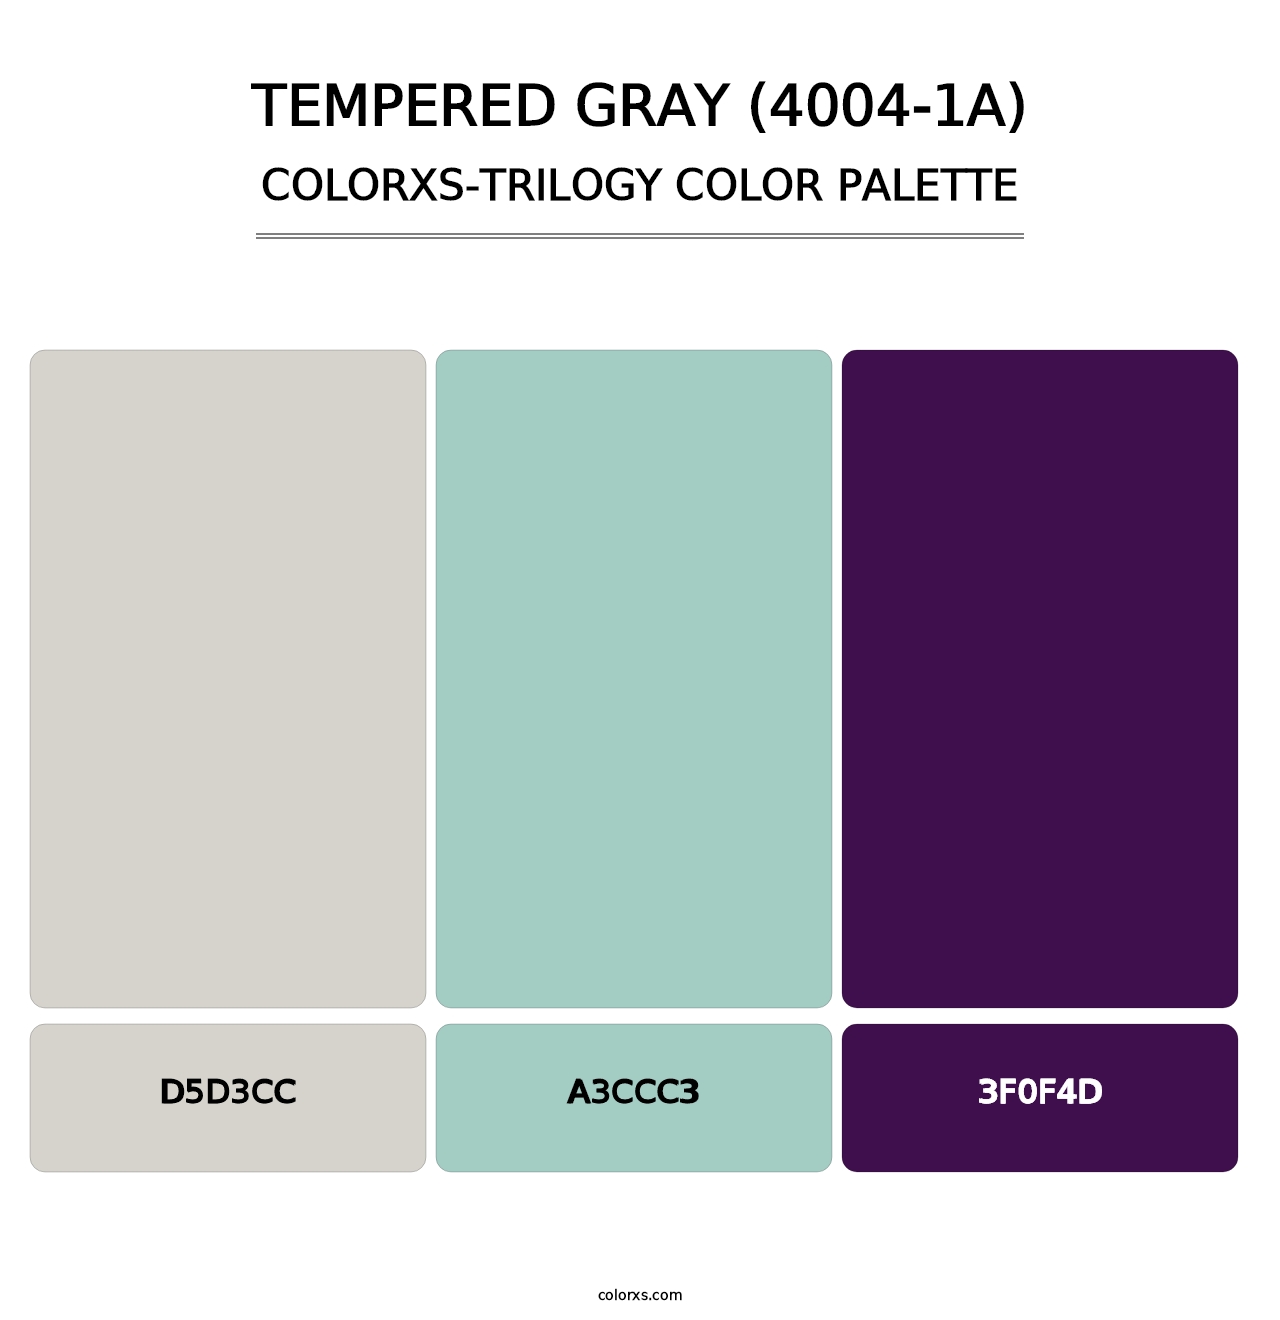 Tempered Gray (4004-1A) - Colorxs Trilogy Palette